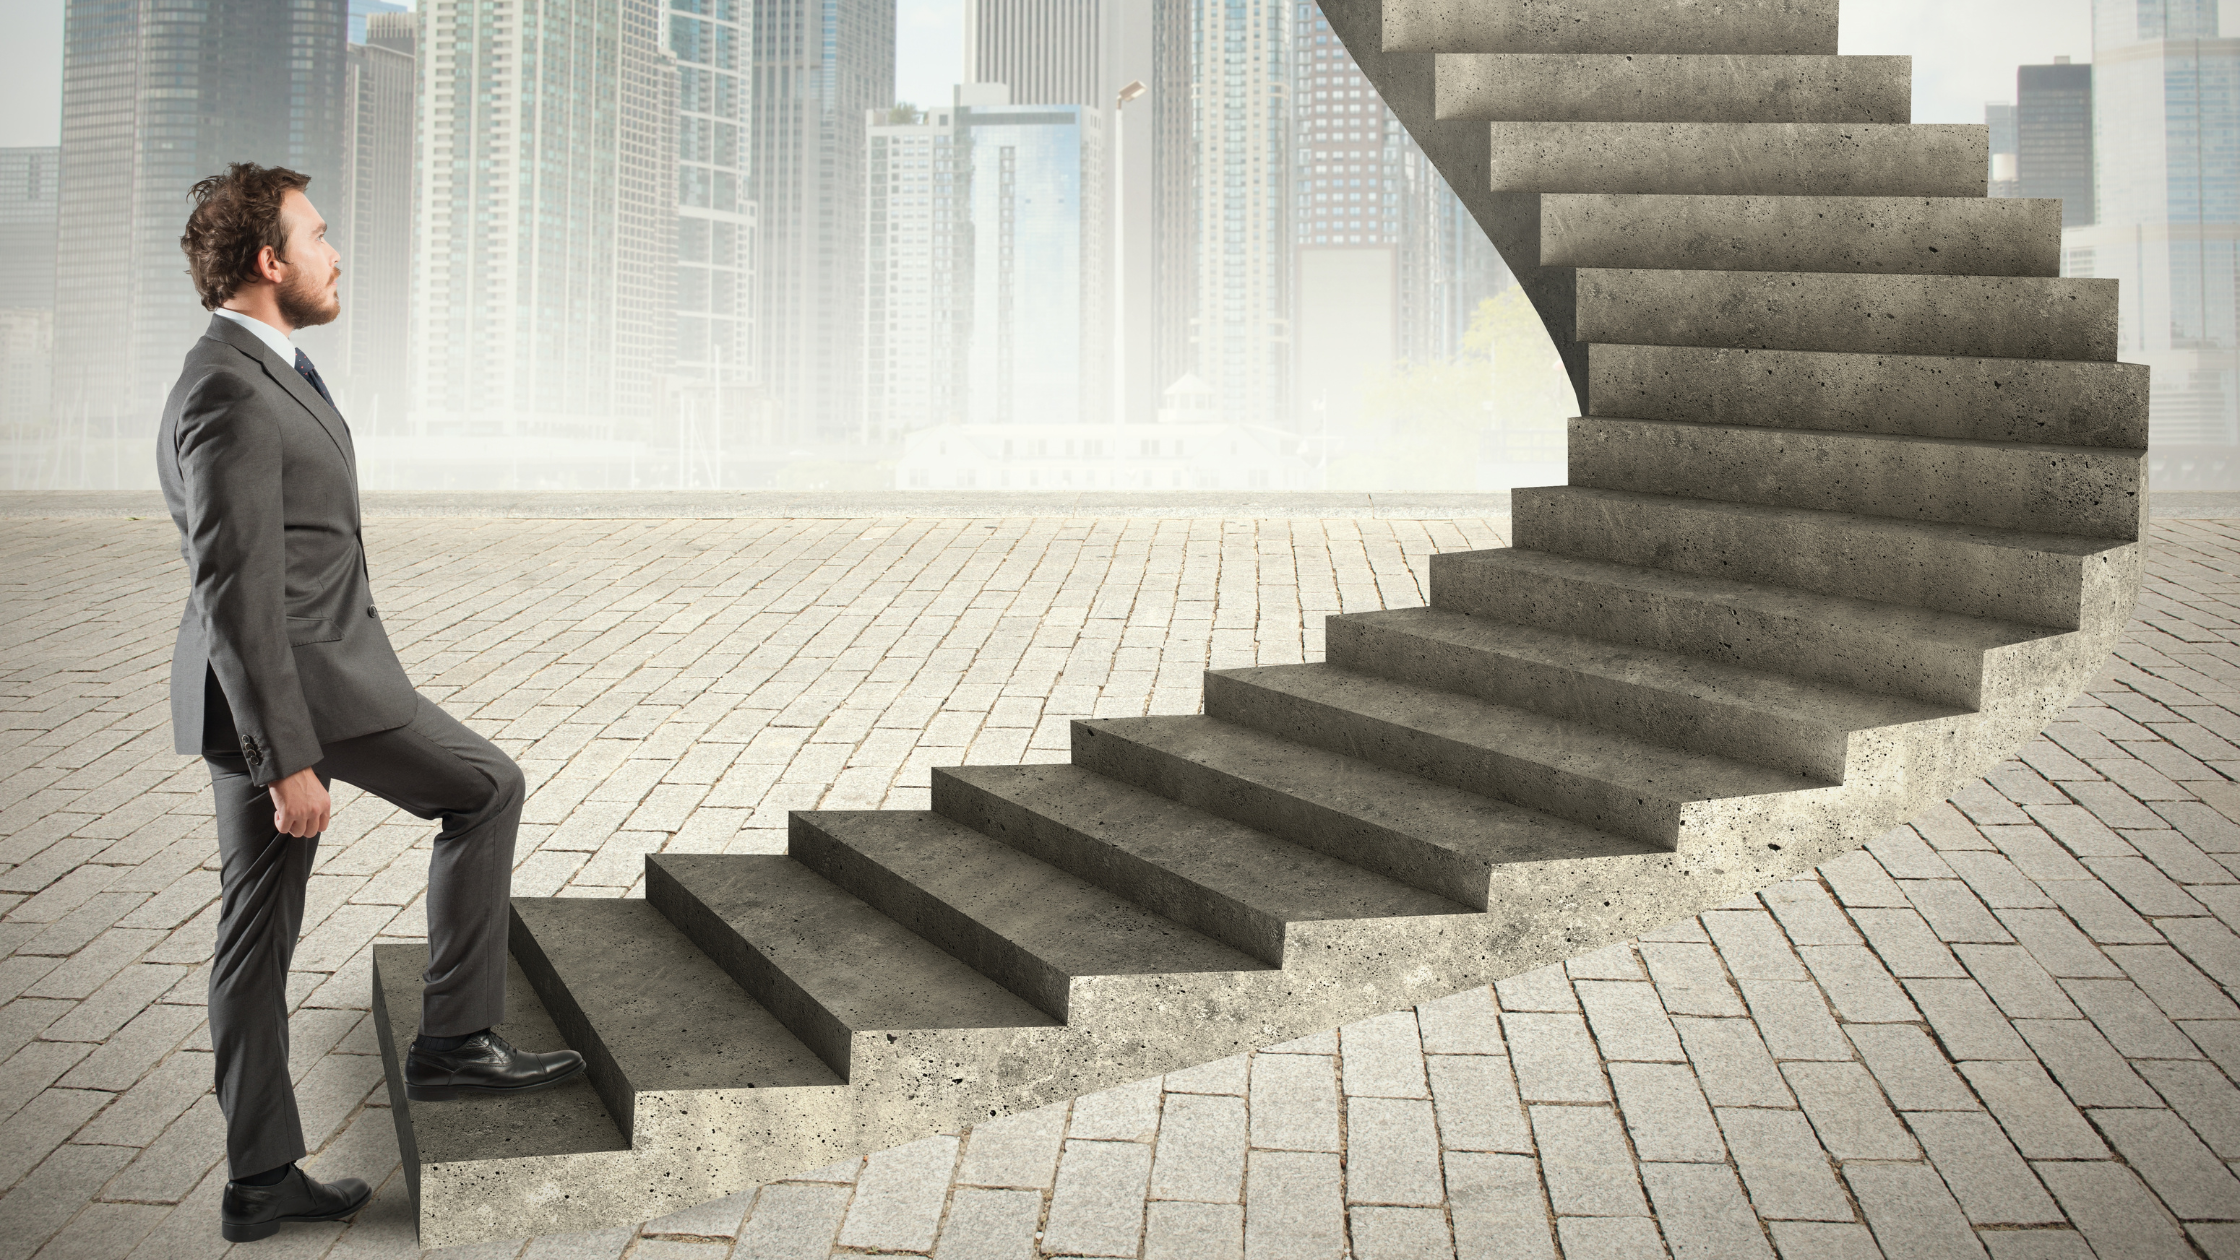 A litigation paralegal takes the first step on a flight of stairs that represents his career path to an unknown destination.